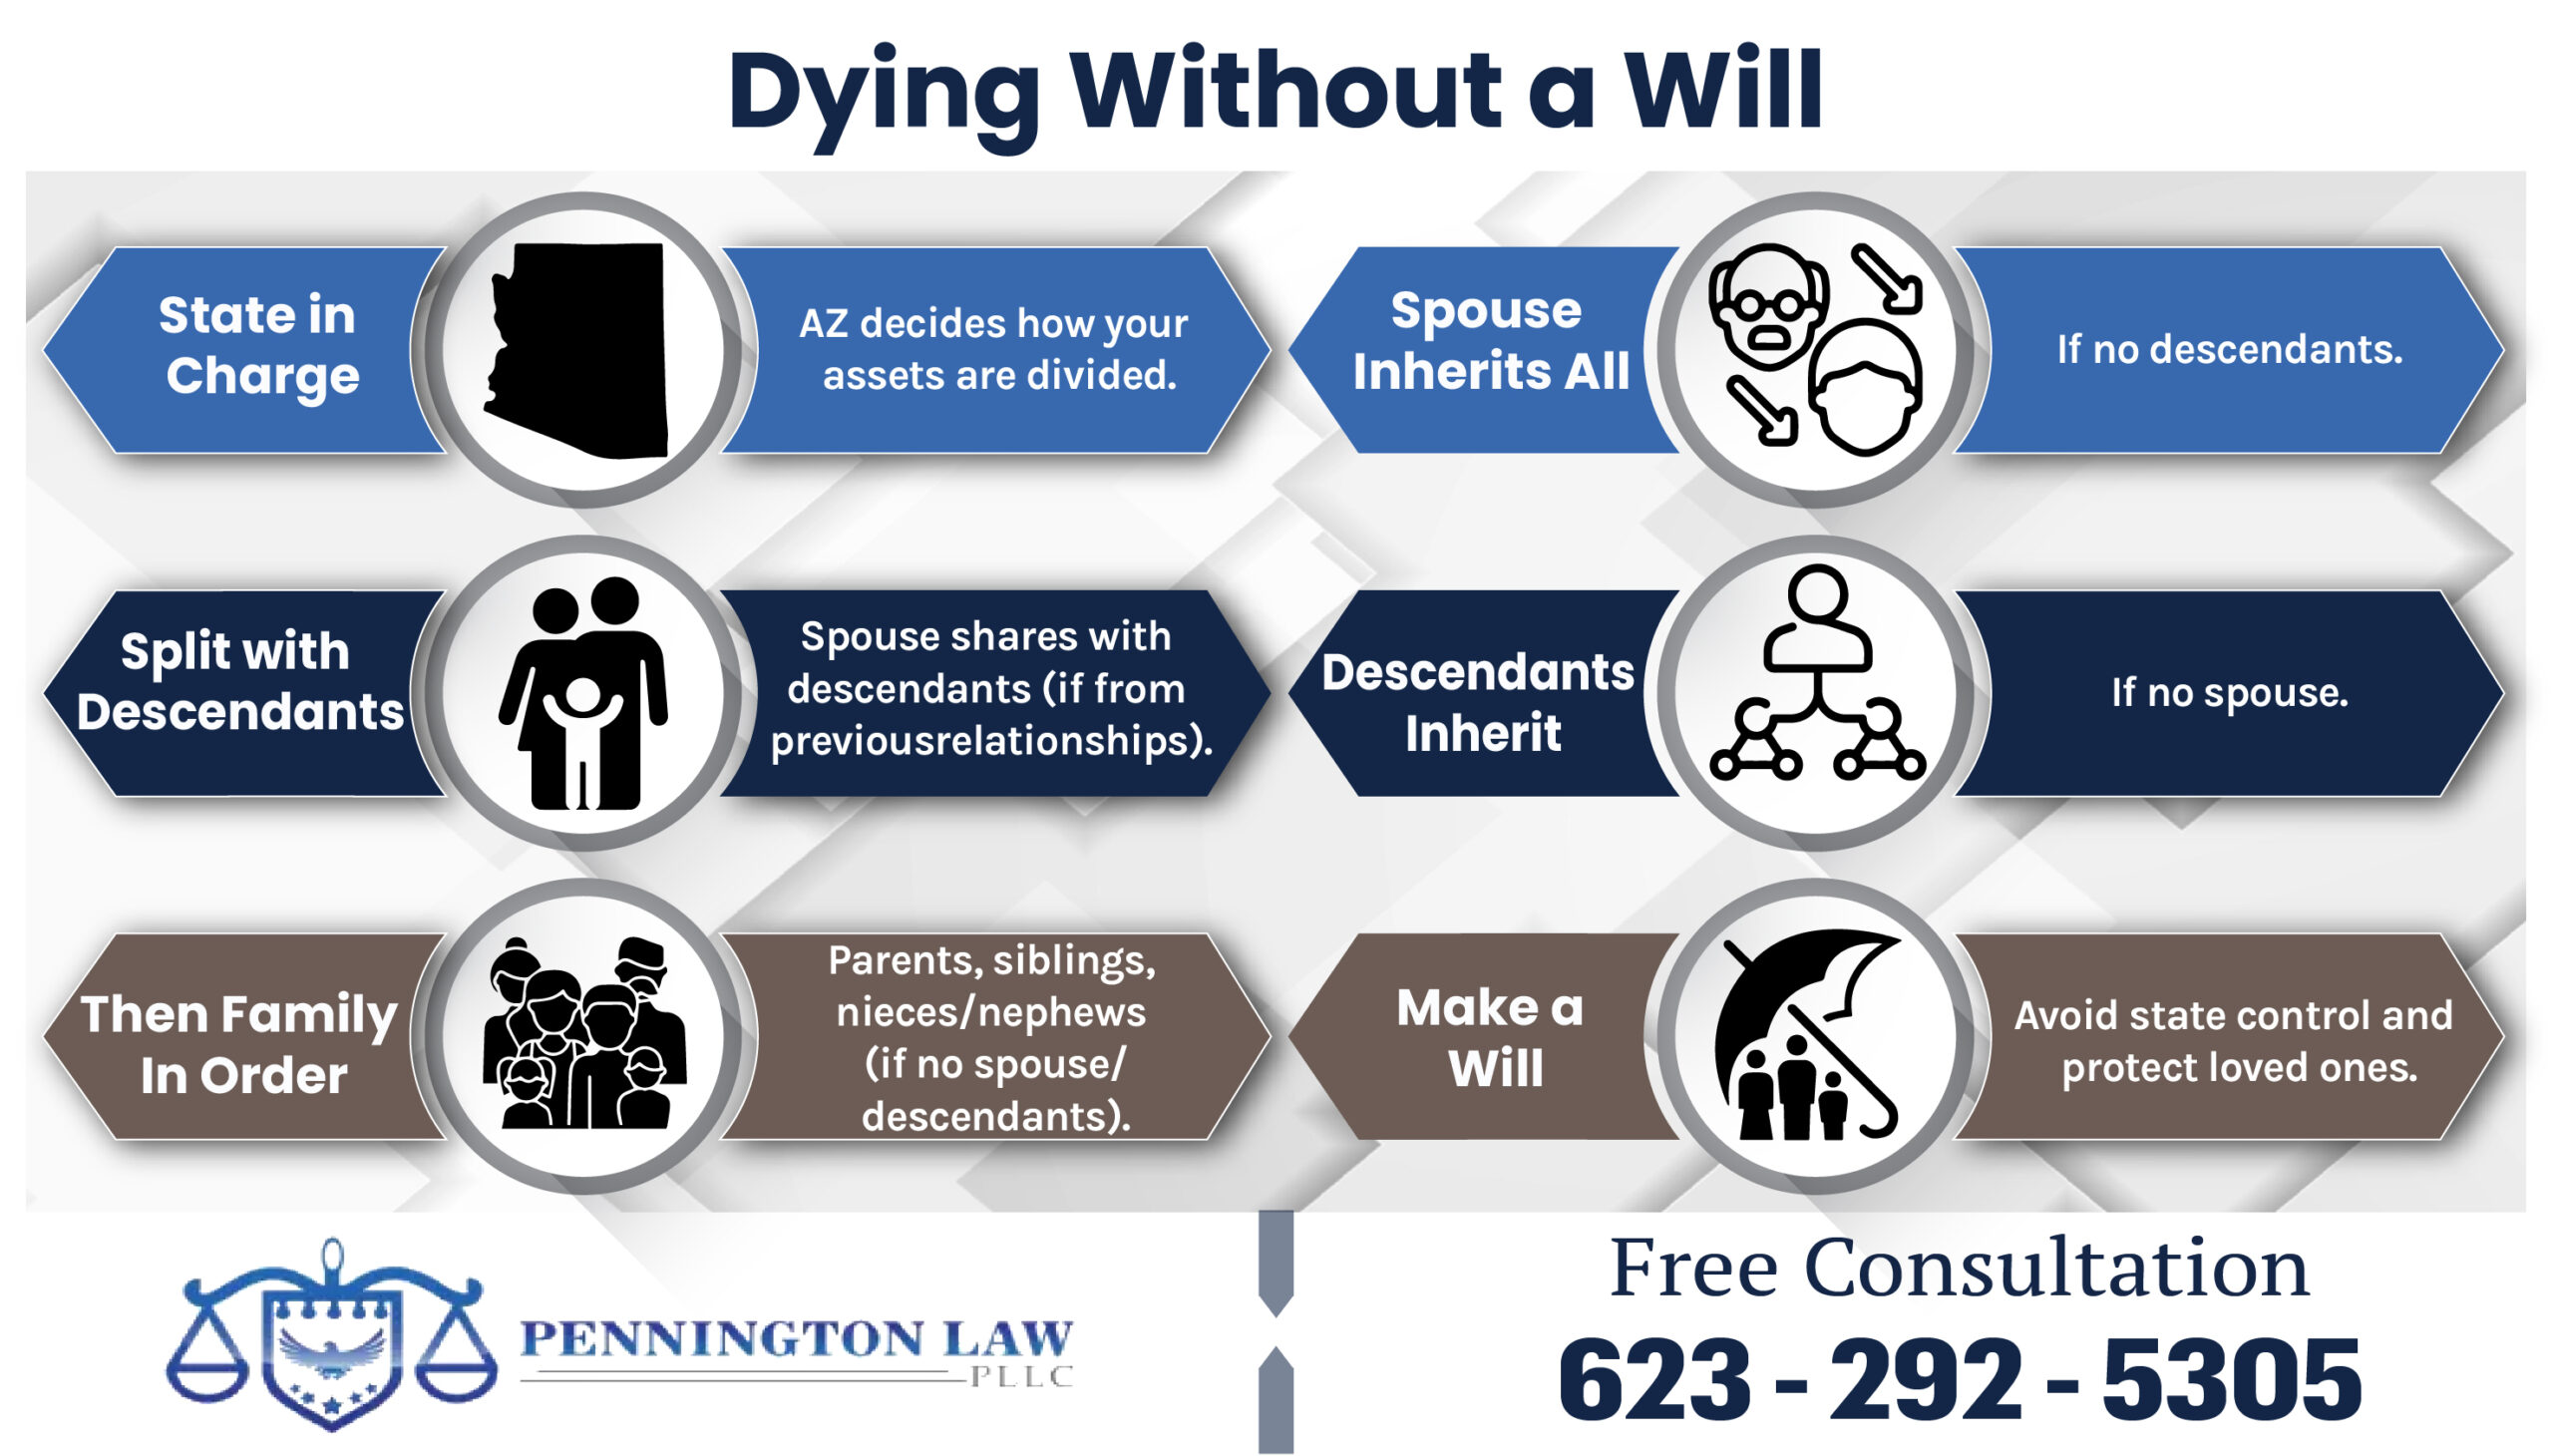 Dying without a will